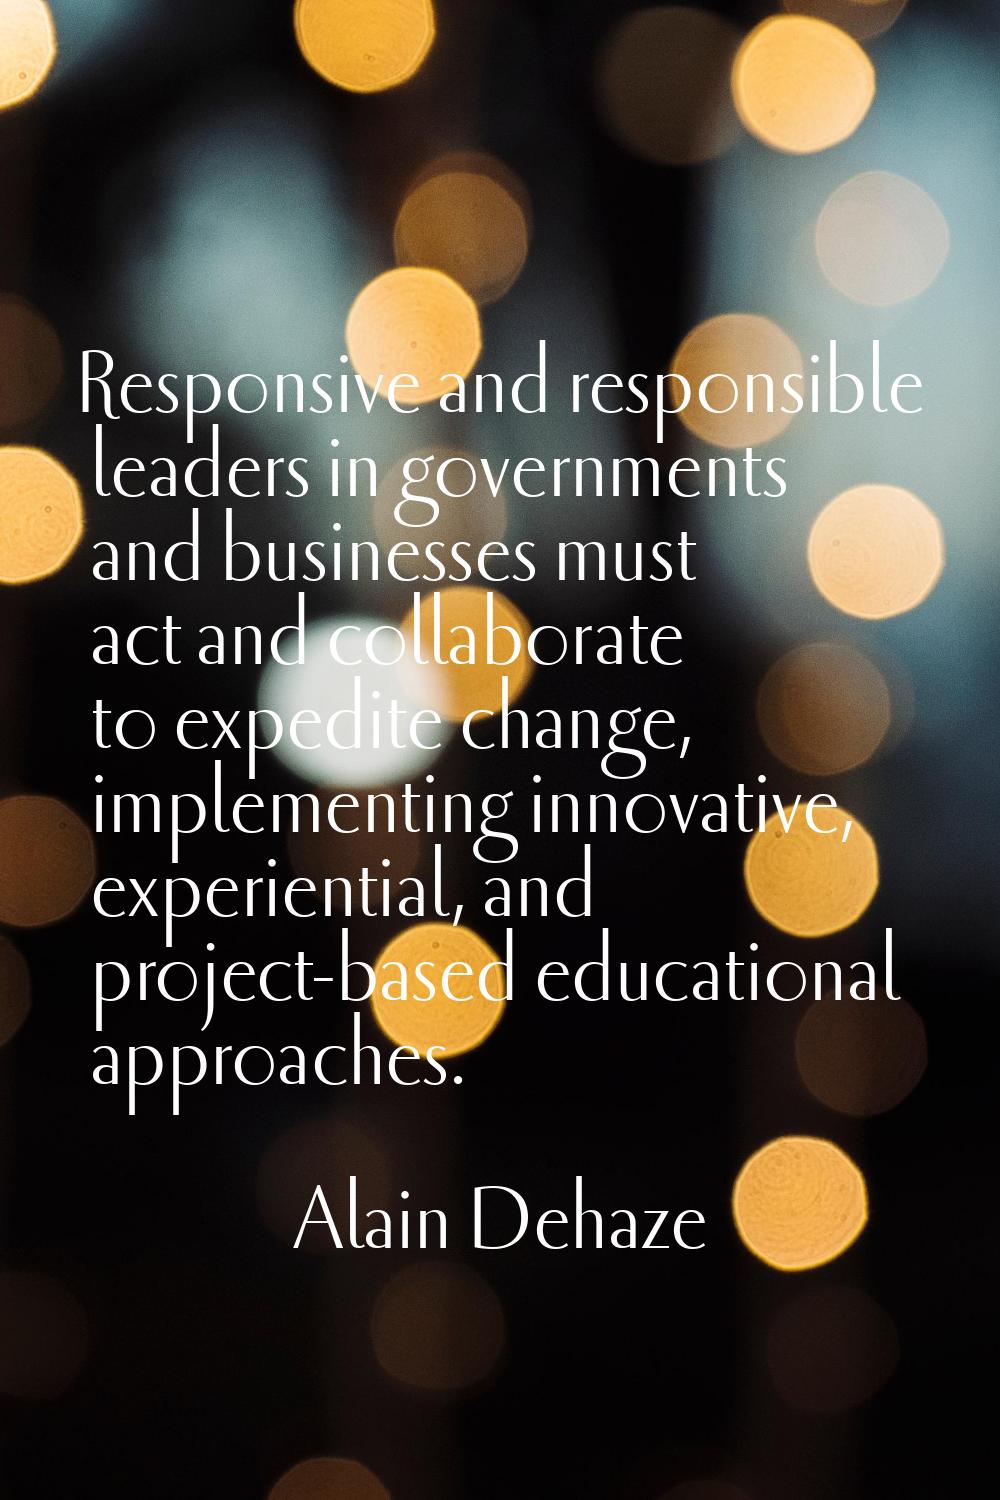 Responsive and responsible leaders in governments and businesses must act and collaborate to expedi